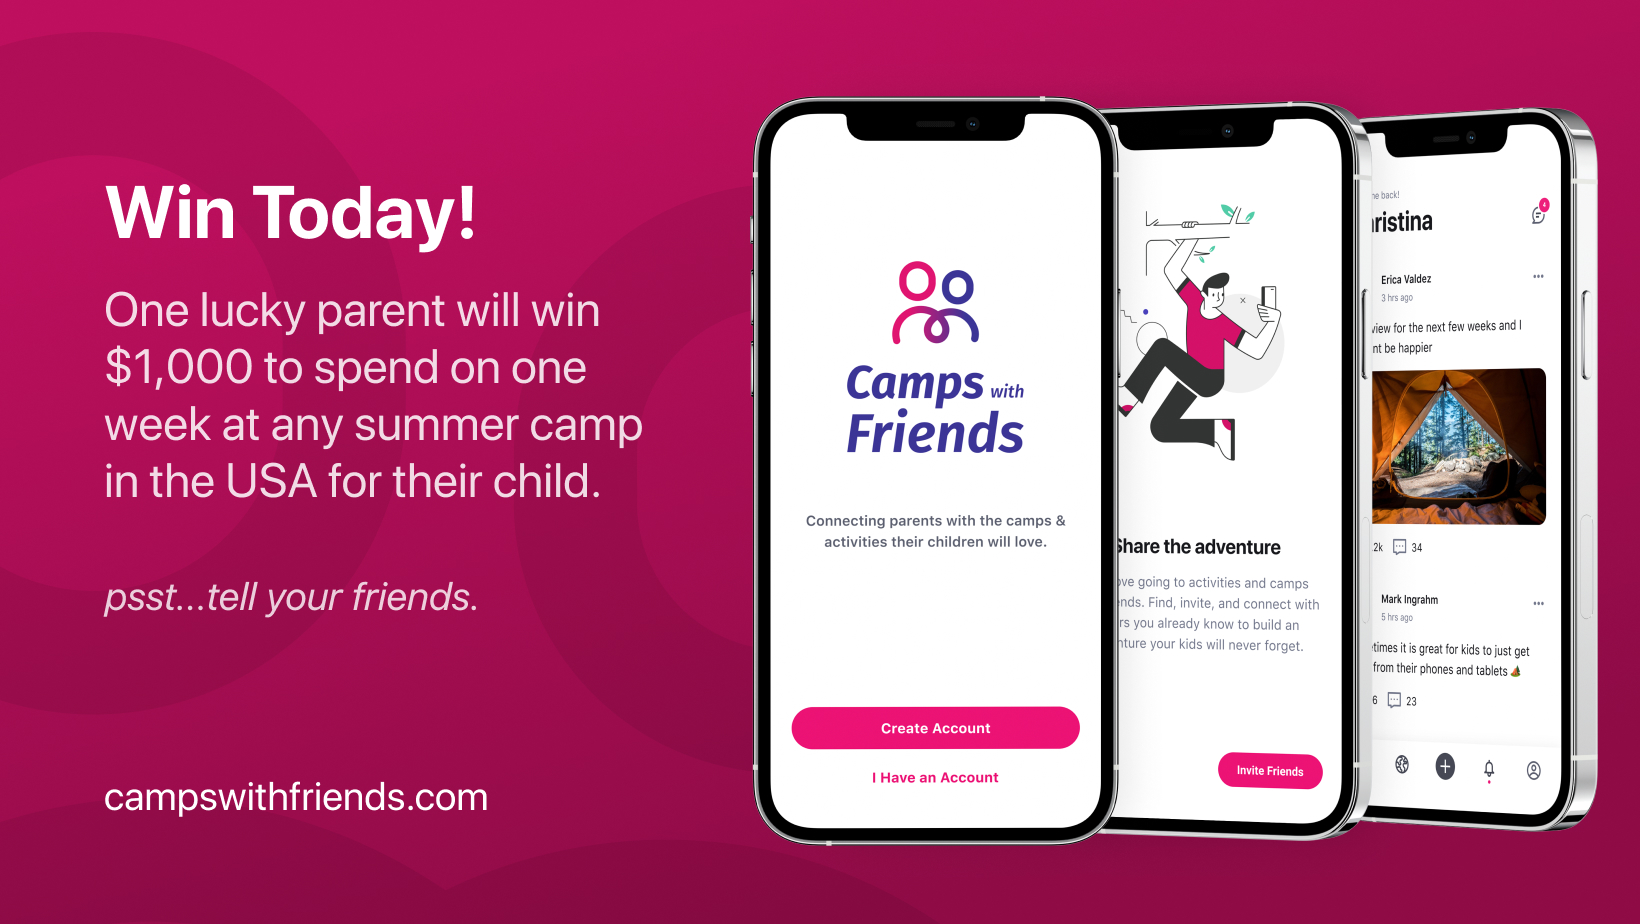 camps with friends giveaway